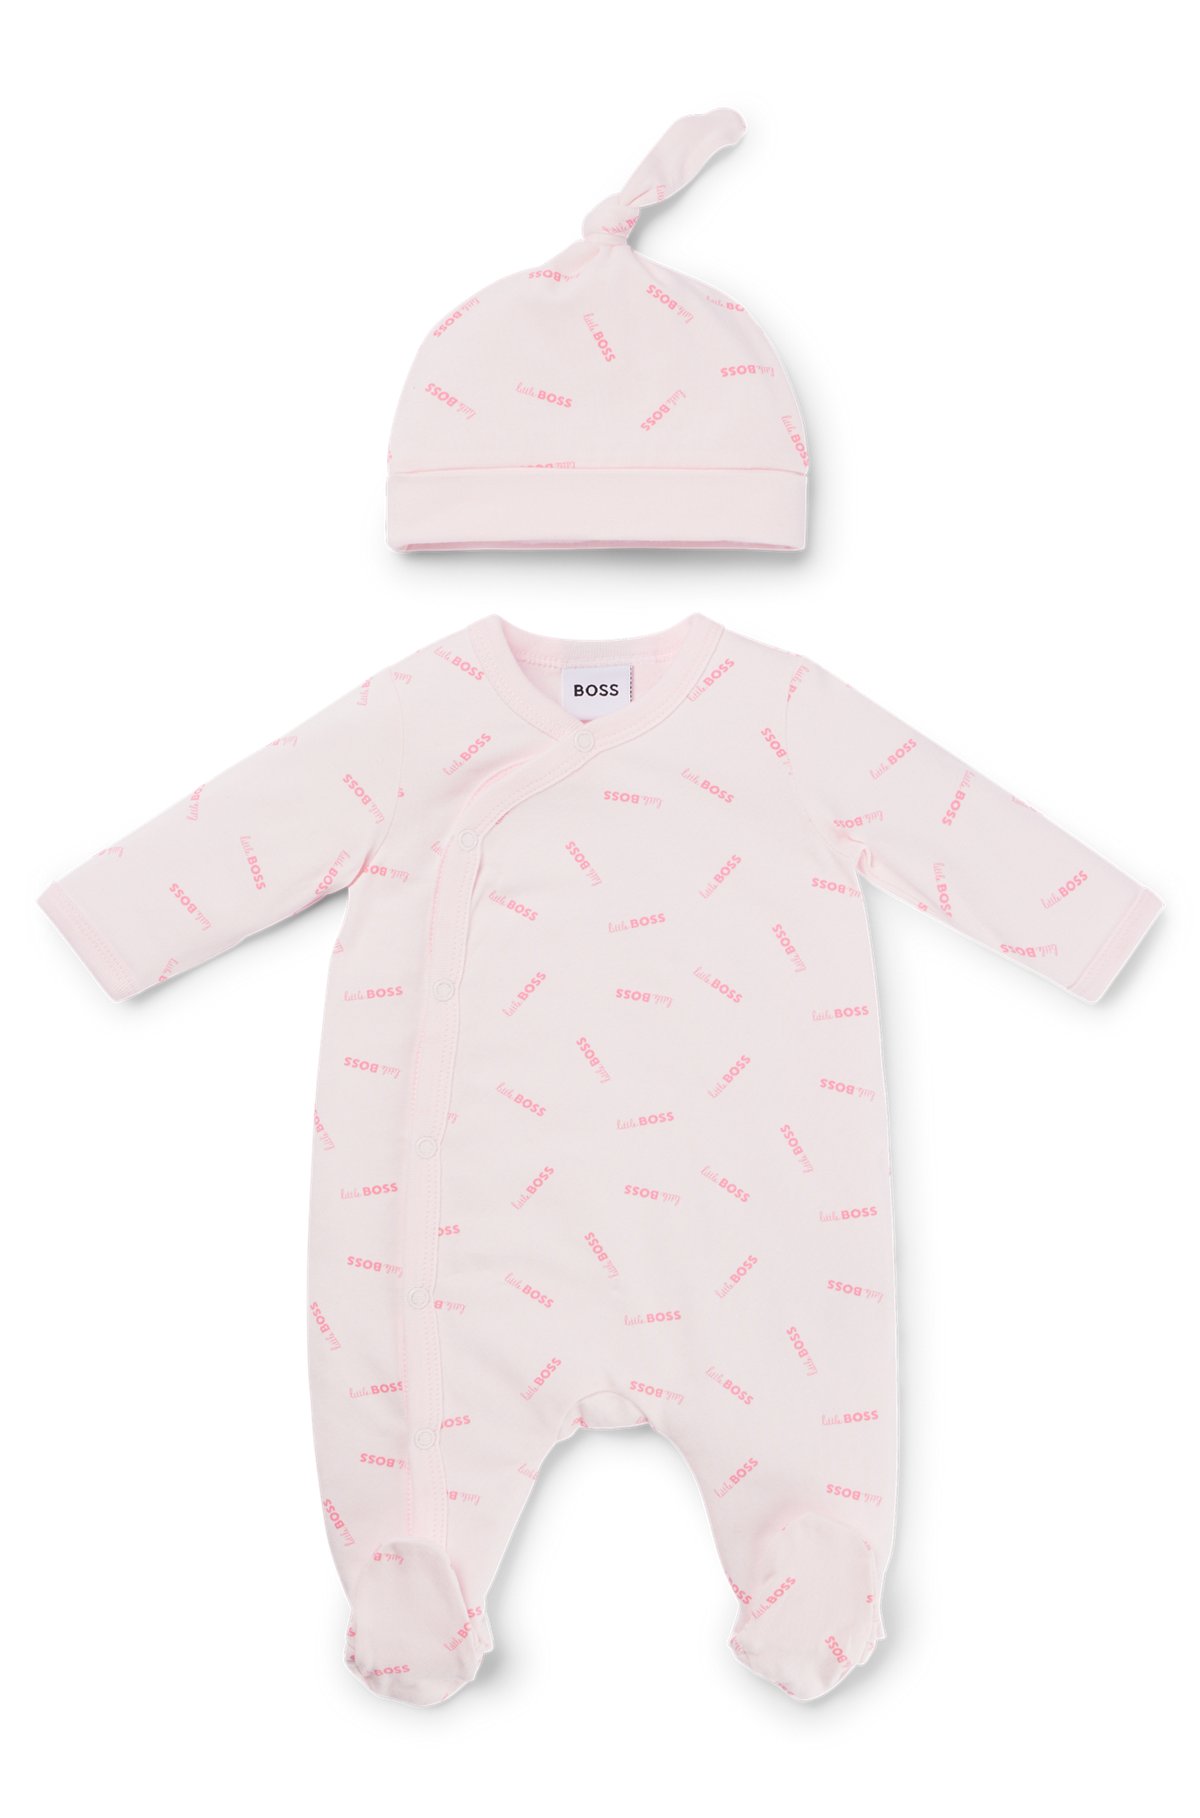 Gift-boxed set of baby sleepsuit and hat, light pink